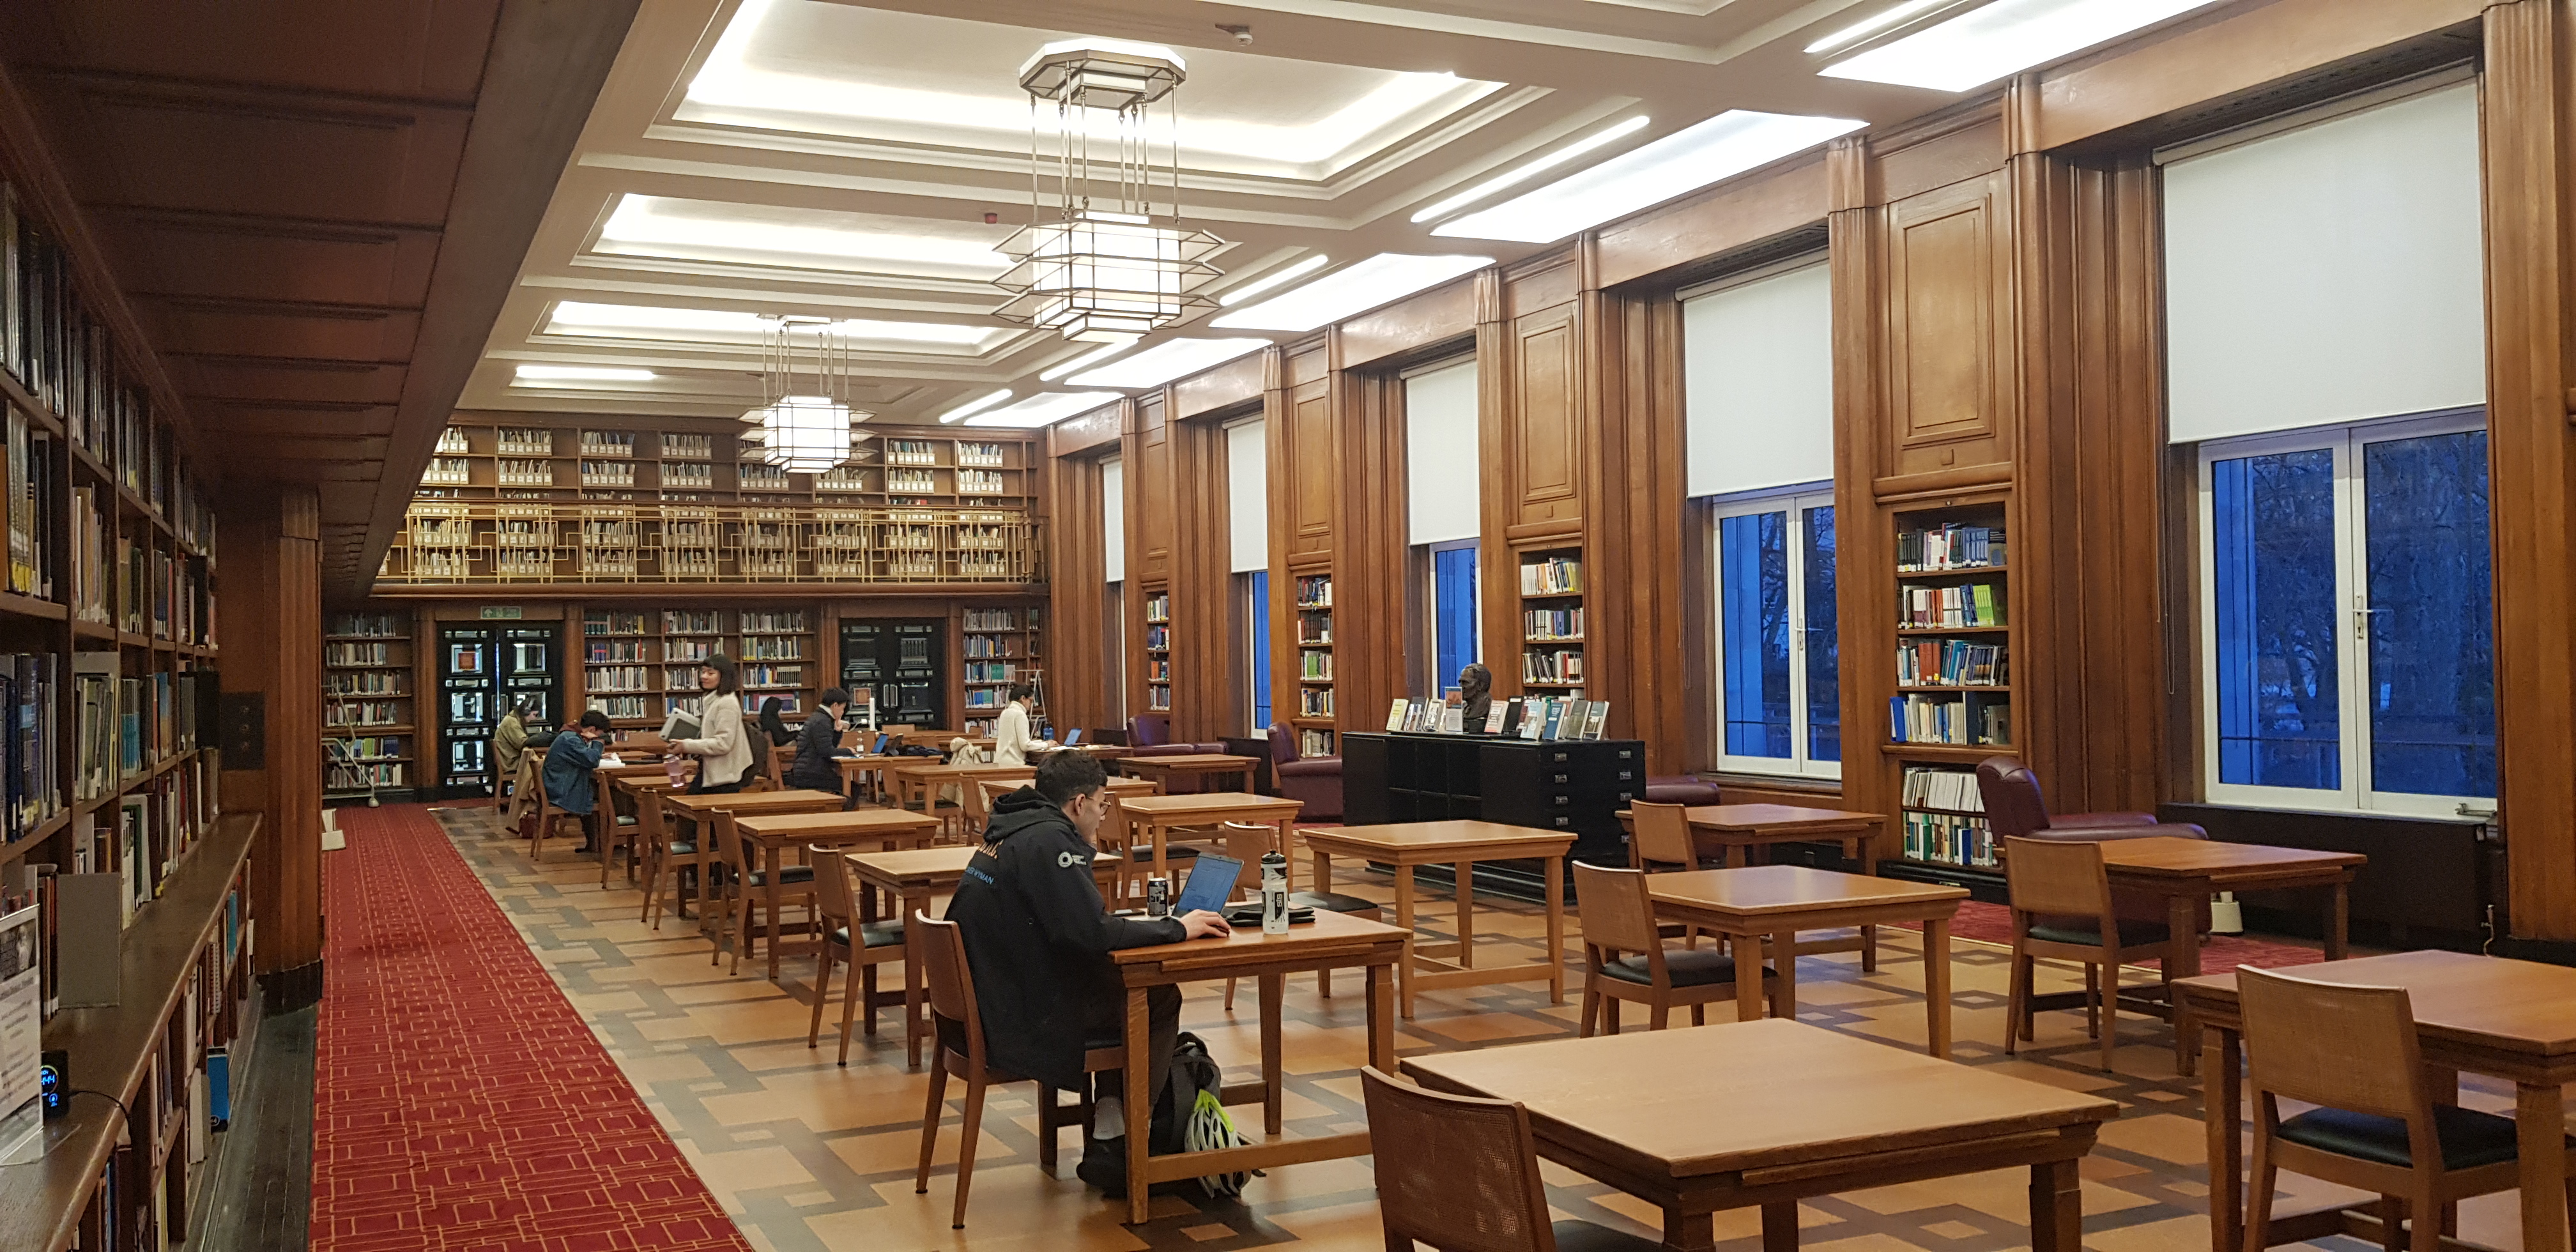 Student studying at LSHTM library, photo by Lea Mansour